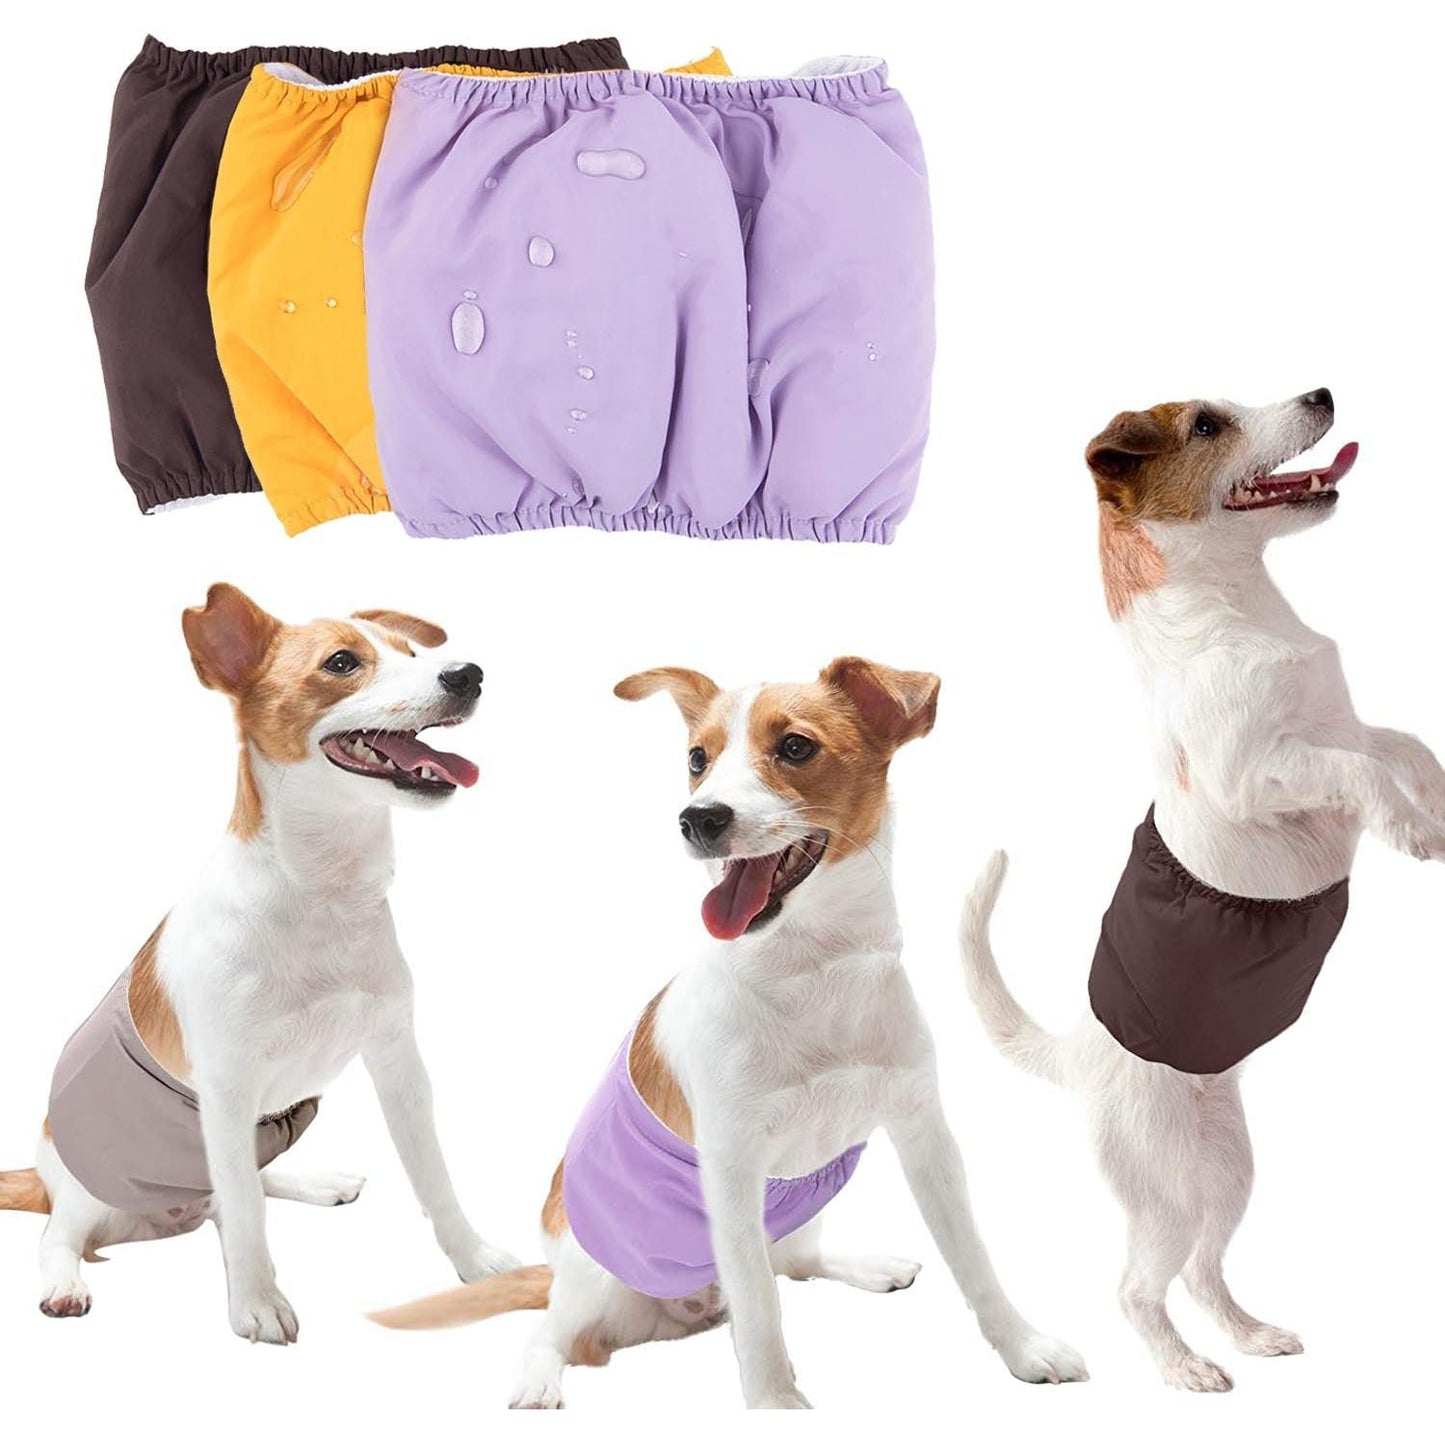 3 dog diapers and 3 male terrier dogs wearing a reusable diaper